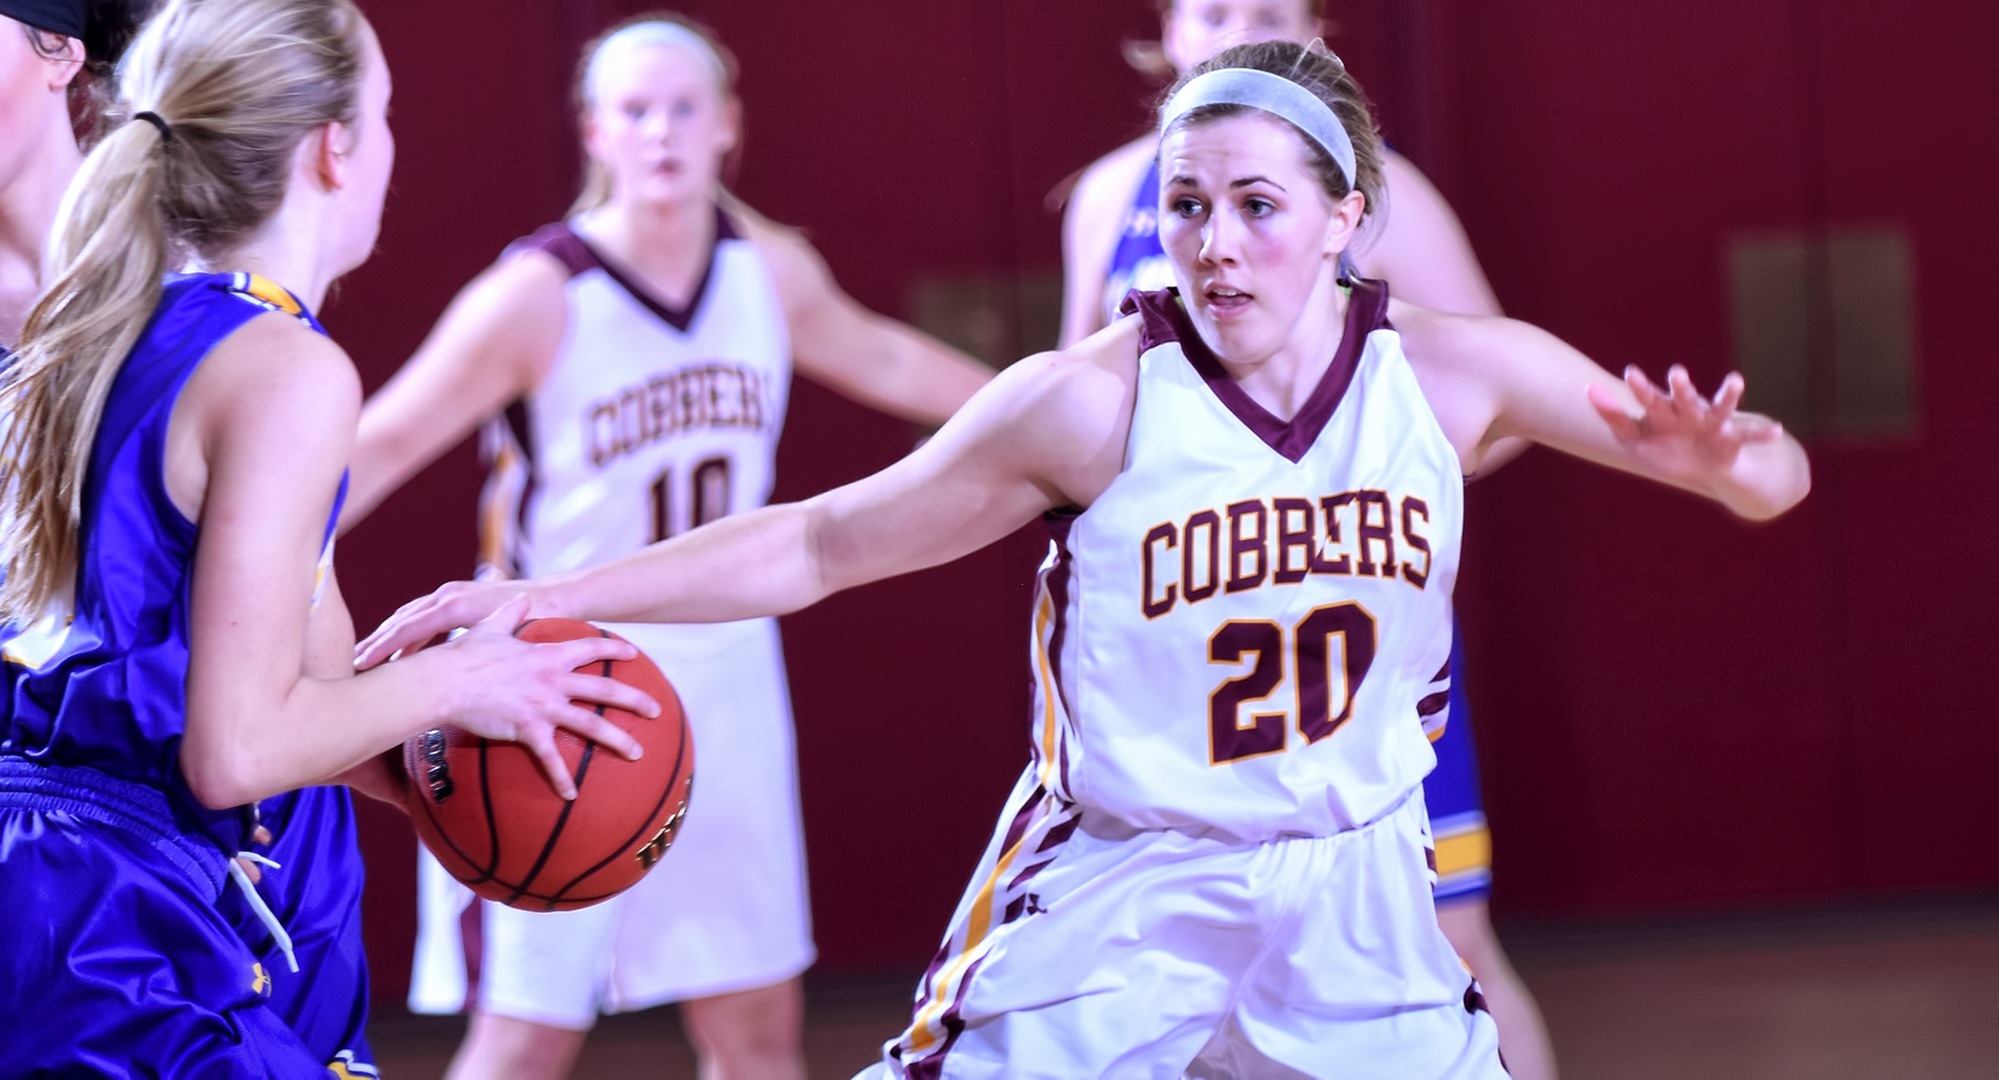 Freshman Emily Beseman had a game-high 21 points and added four rebounds and two assists in the Cobbers' game at St. Thomas.